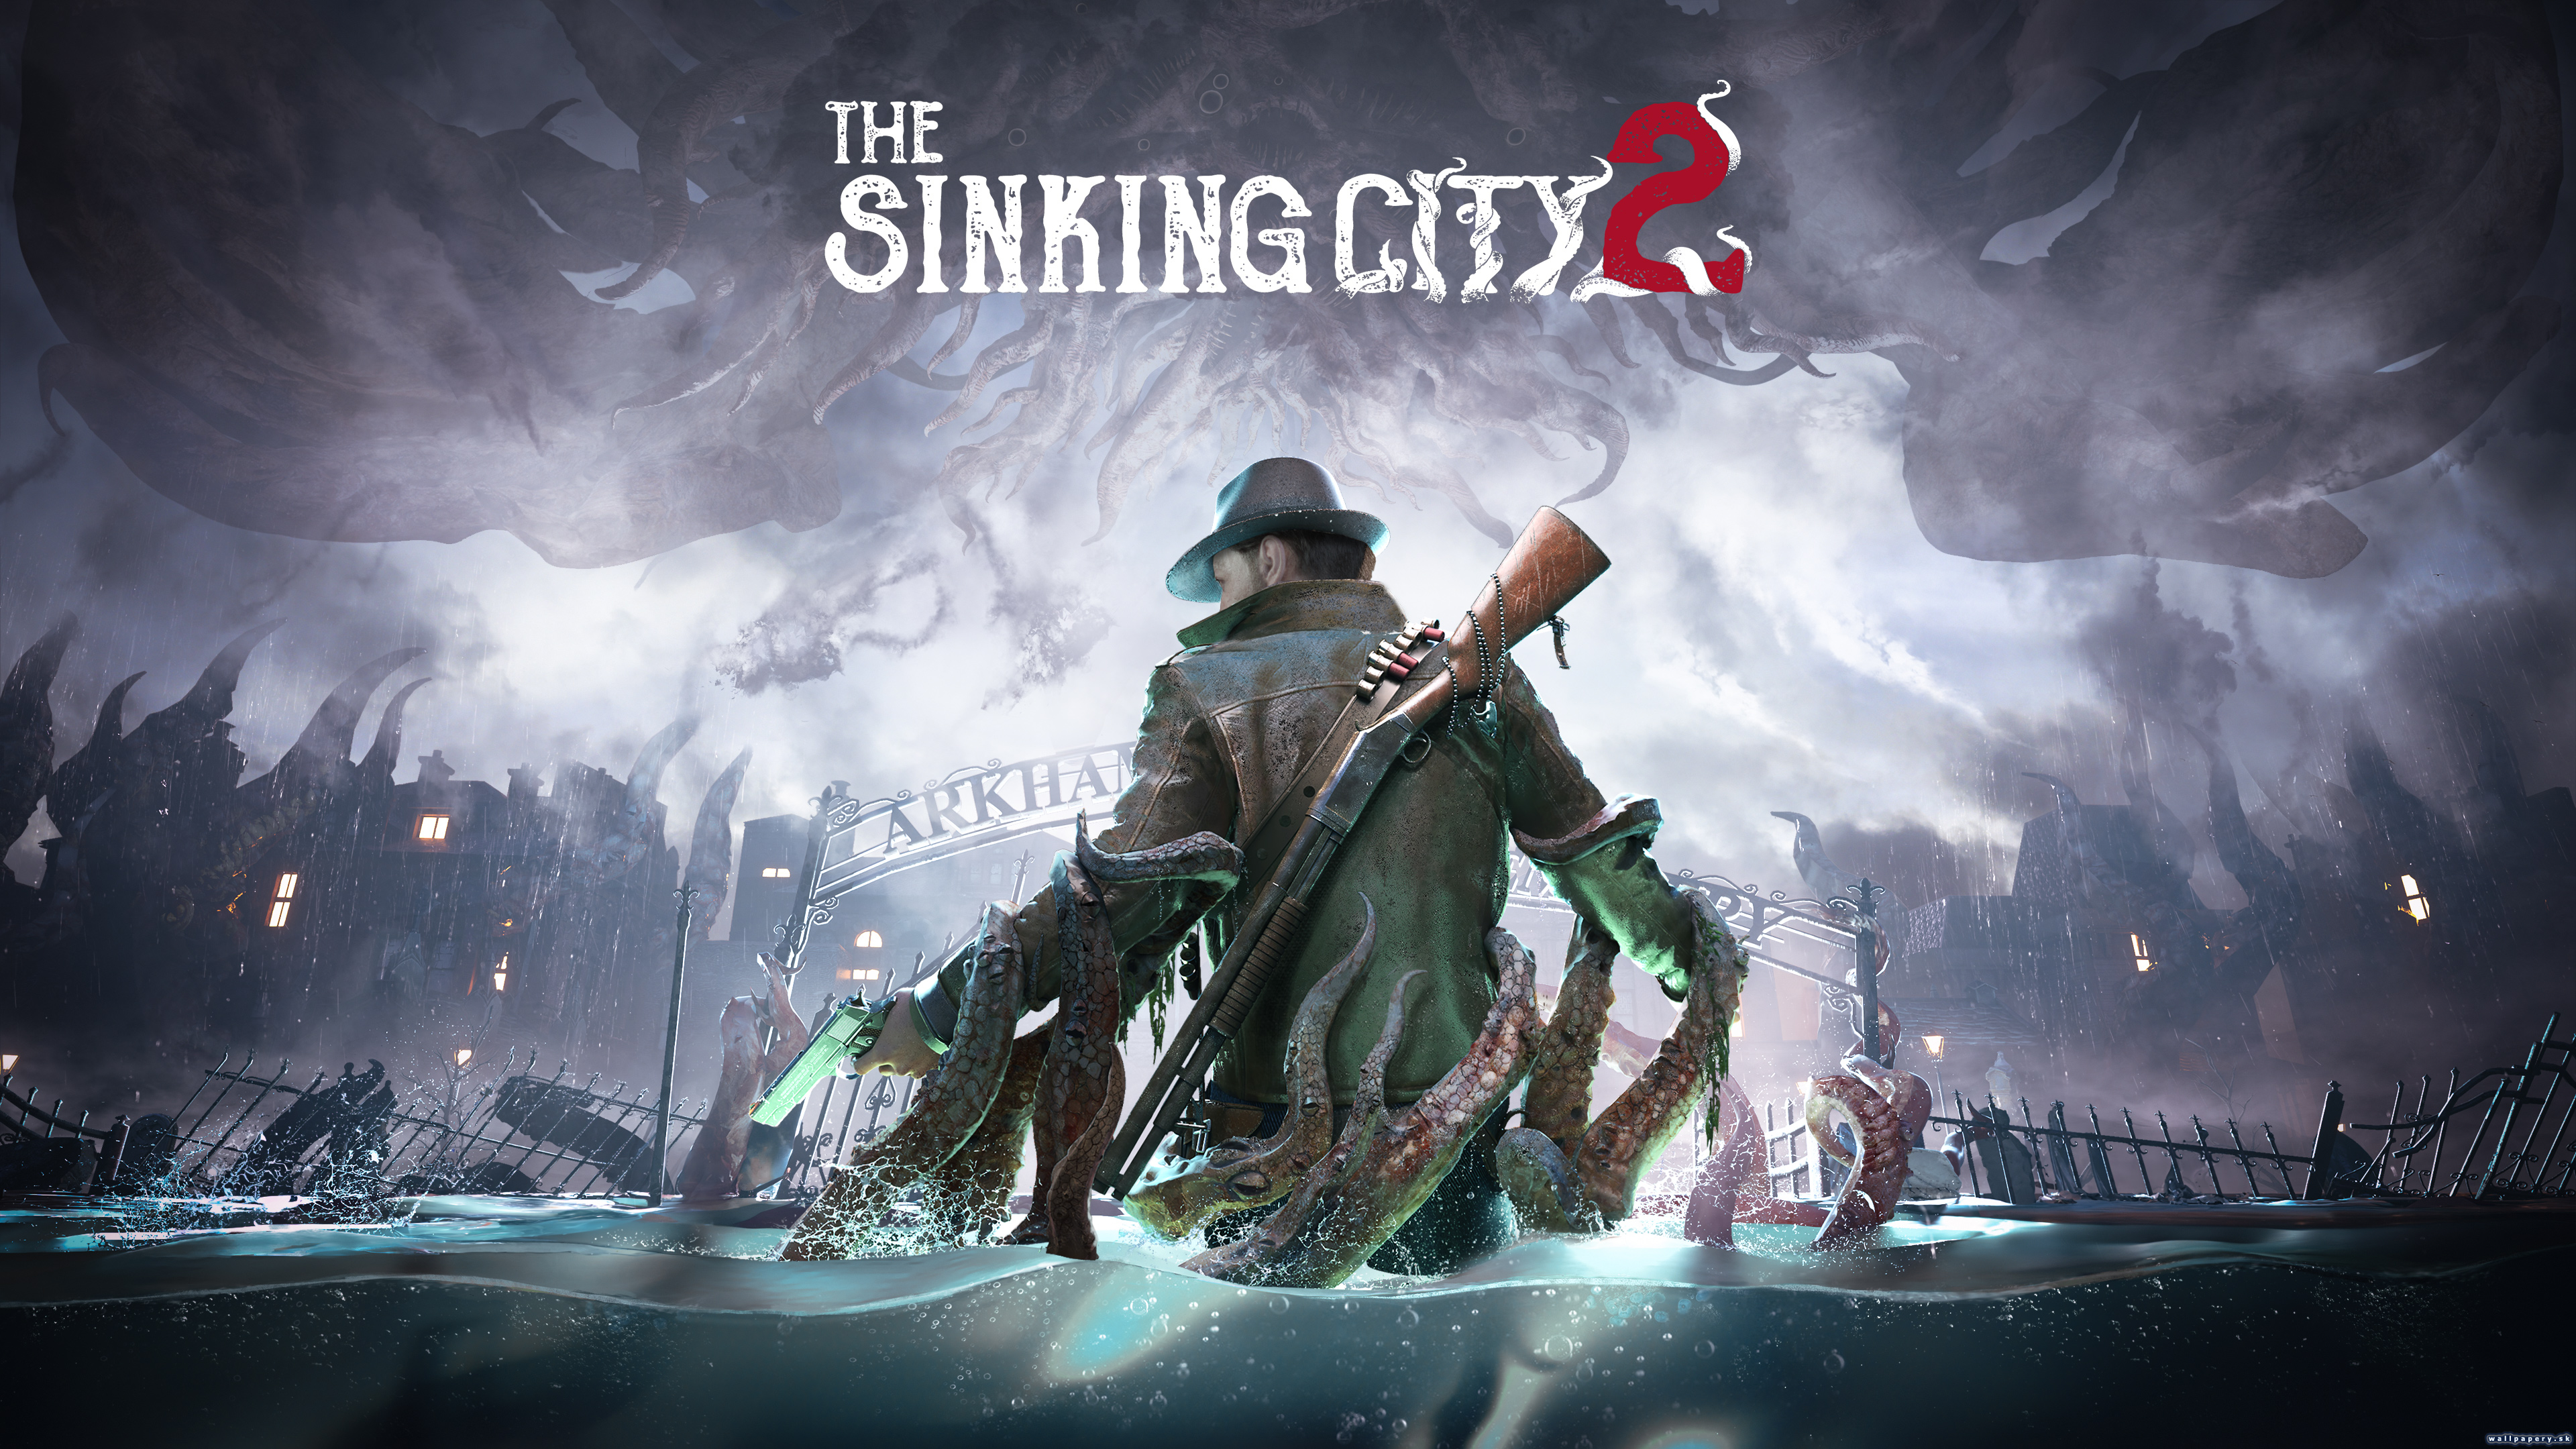 The Sinking City 2 - wallpaper 1